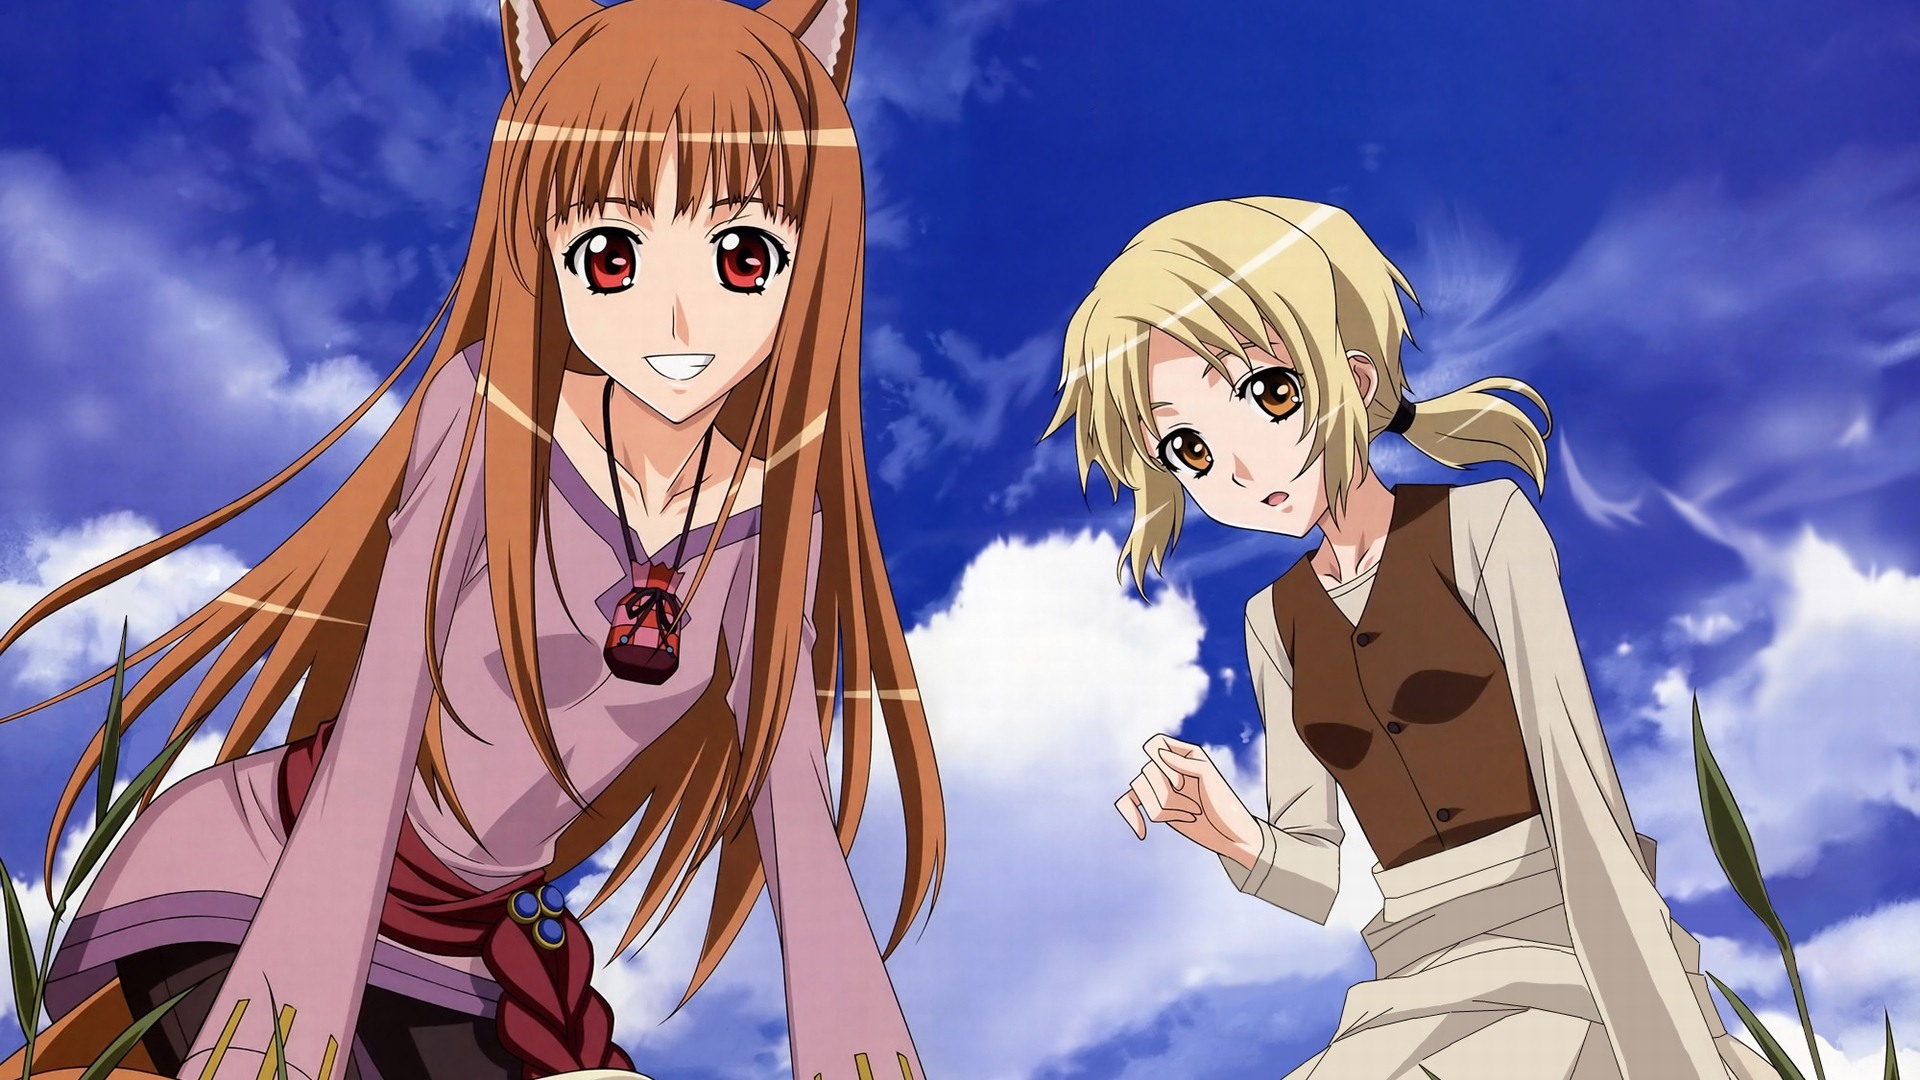 Spice and Wolf HD Wallpaper #17 - 1920x1080